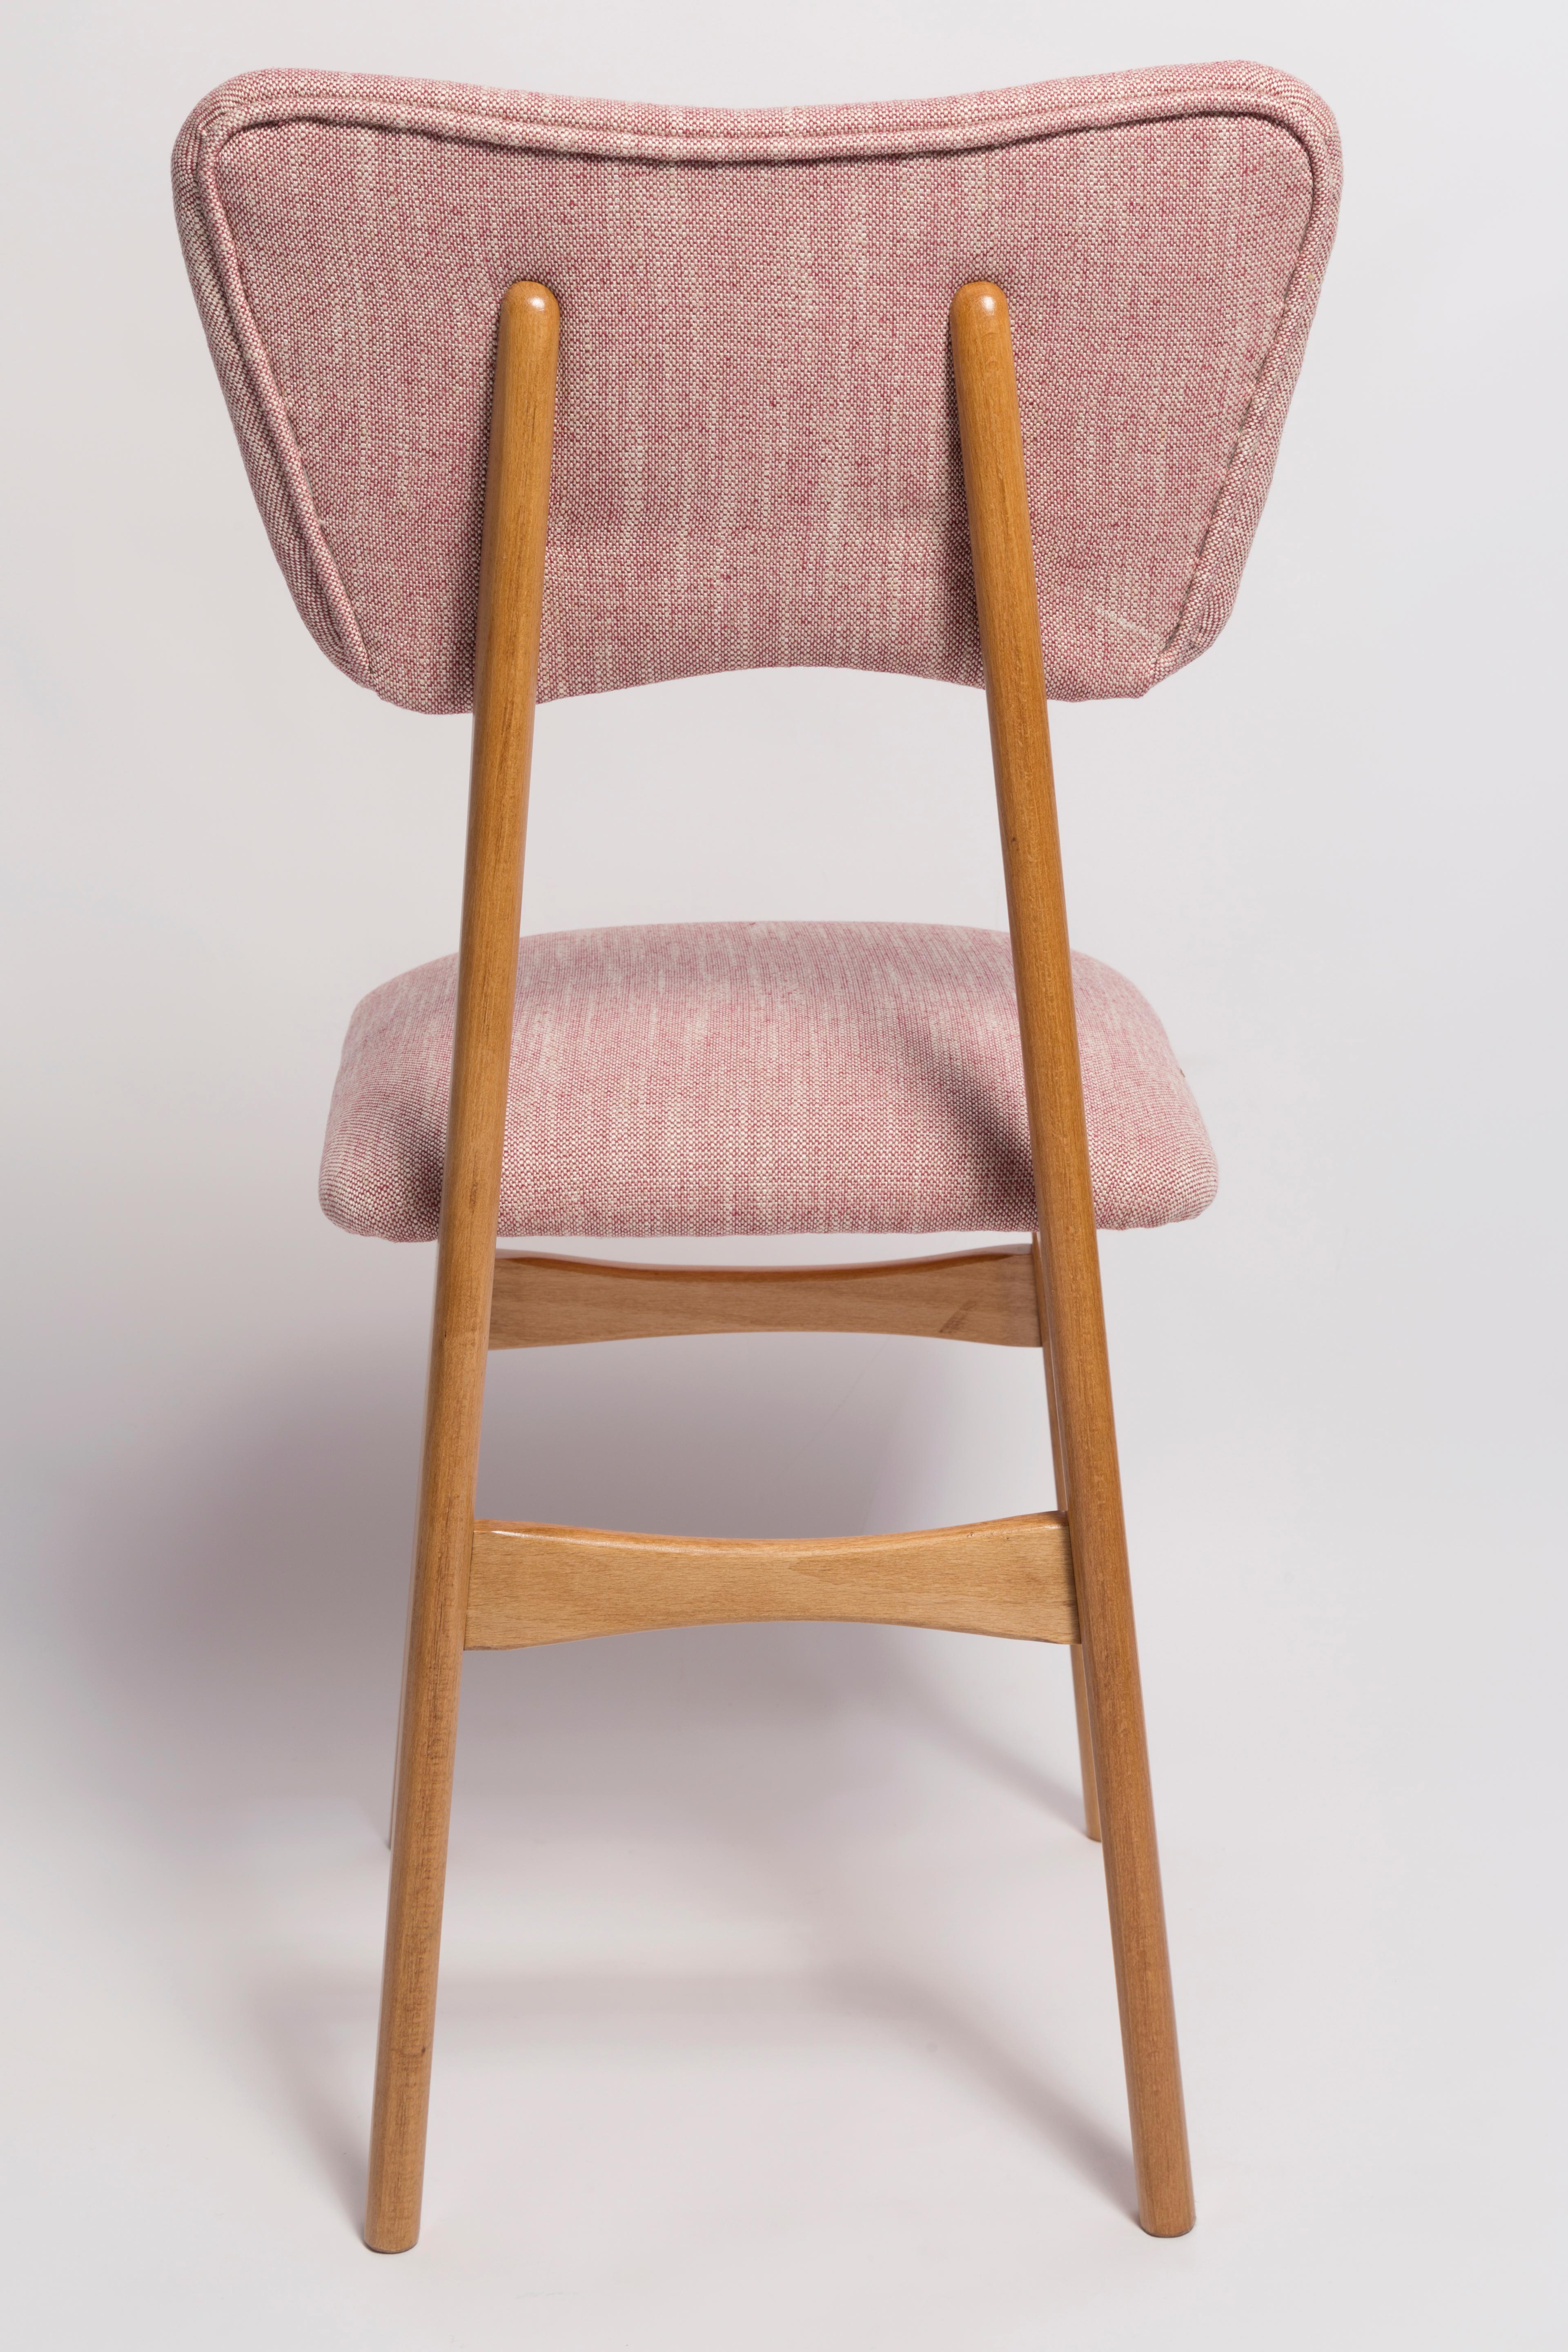 Mid Century Butterfly Dining Chair, Pink Linen, Light Wood, Europe, 1960s For Sale 2